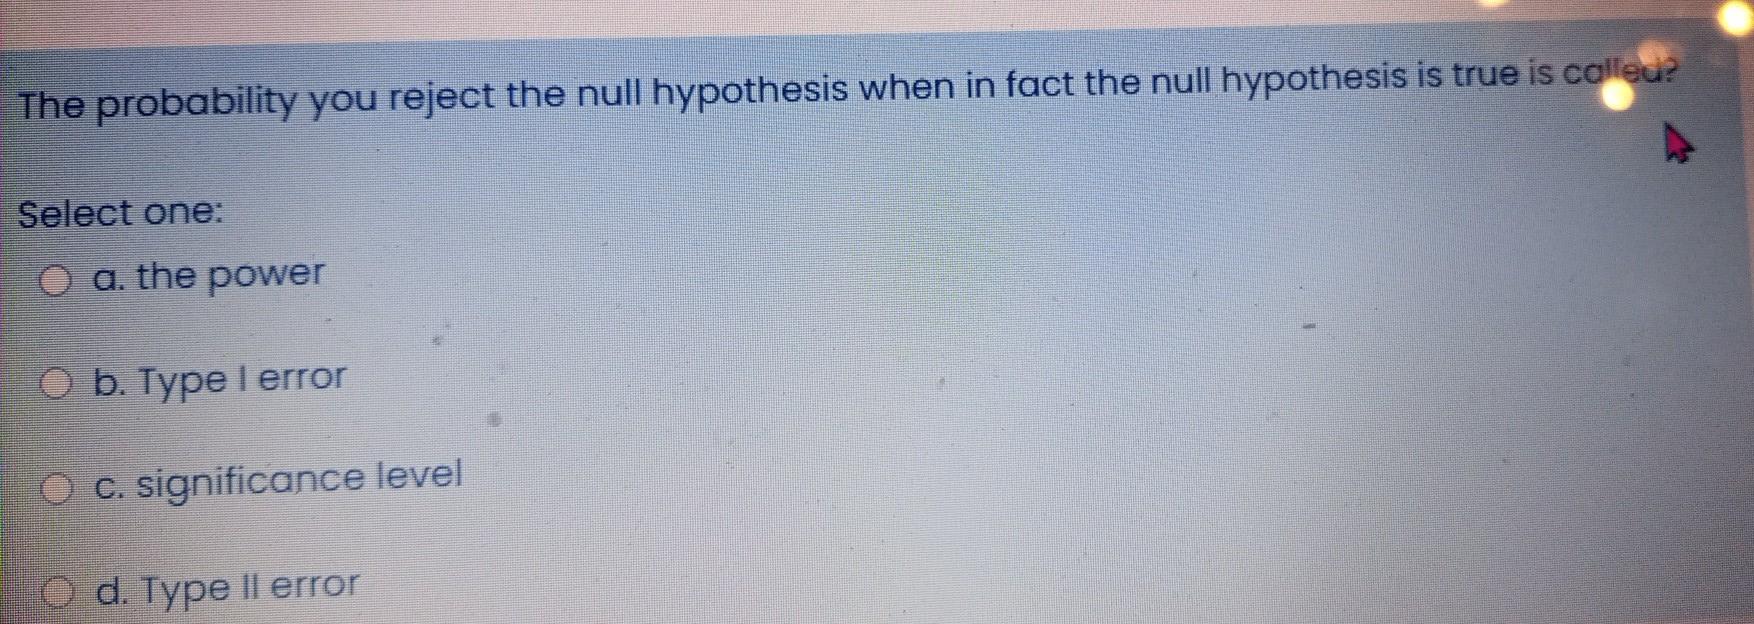 The Probability You Reject The Null Hypothesis When In Fact The Null Hypothesis Is True Is Colleu Select One O A The 1